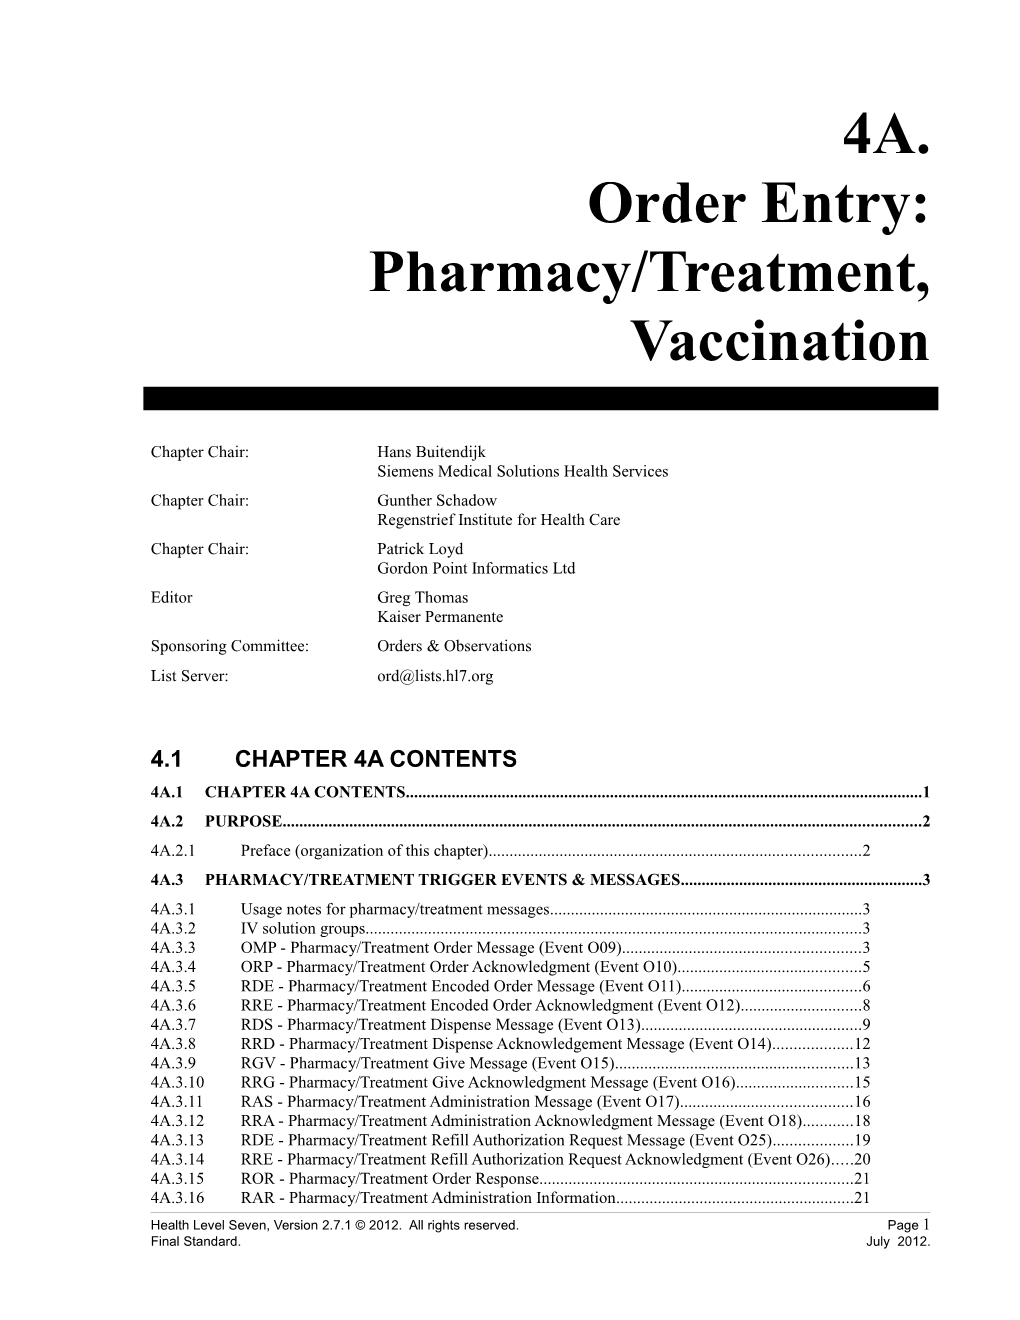 V2.7 Chapter 4B - Order RX Treatment Vaccination